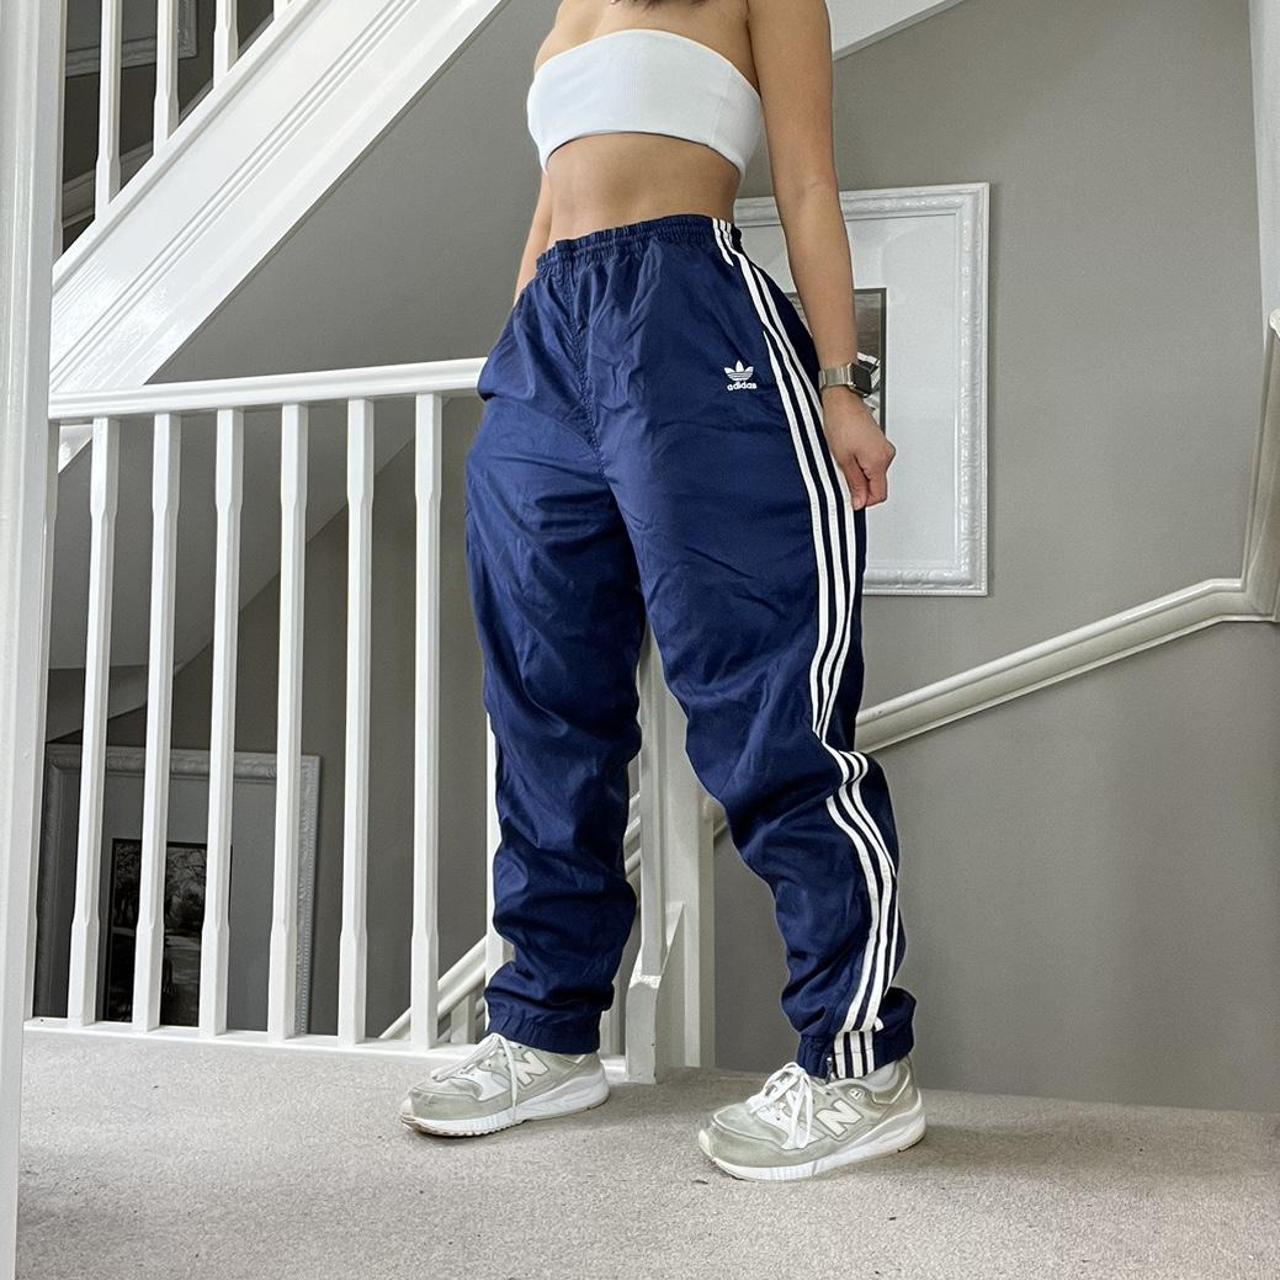 Adidas Originals Women's Navy and White Trousers | Depop